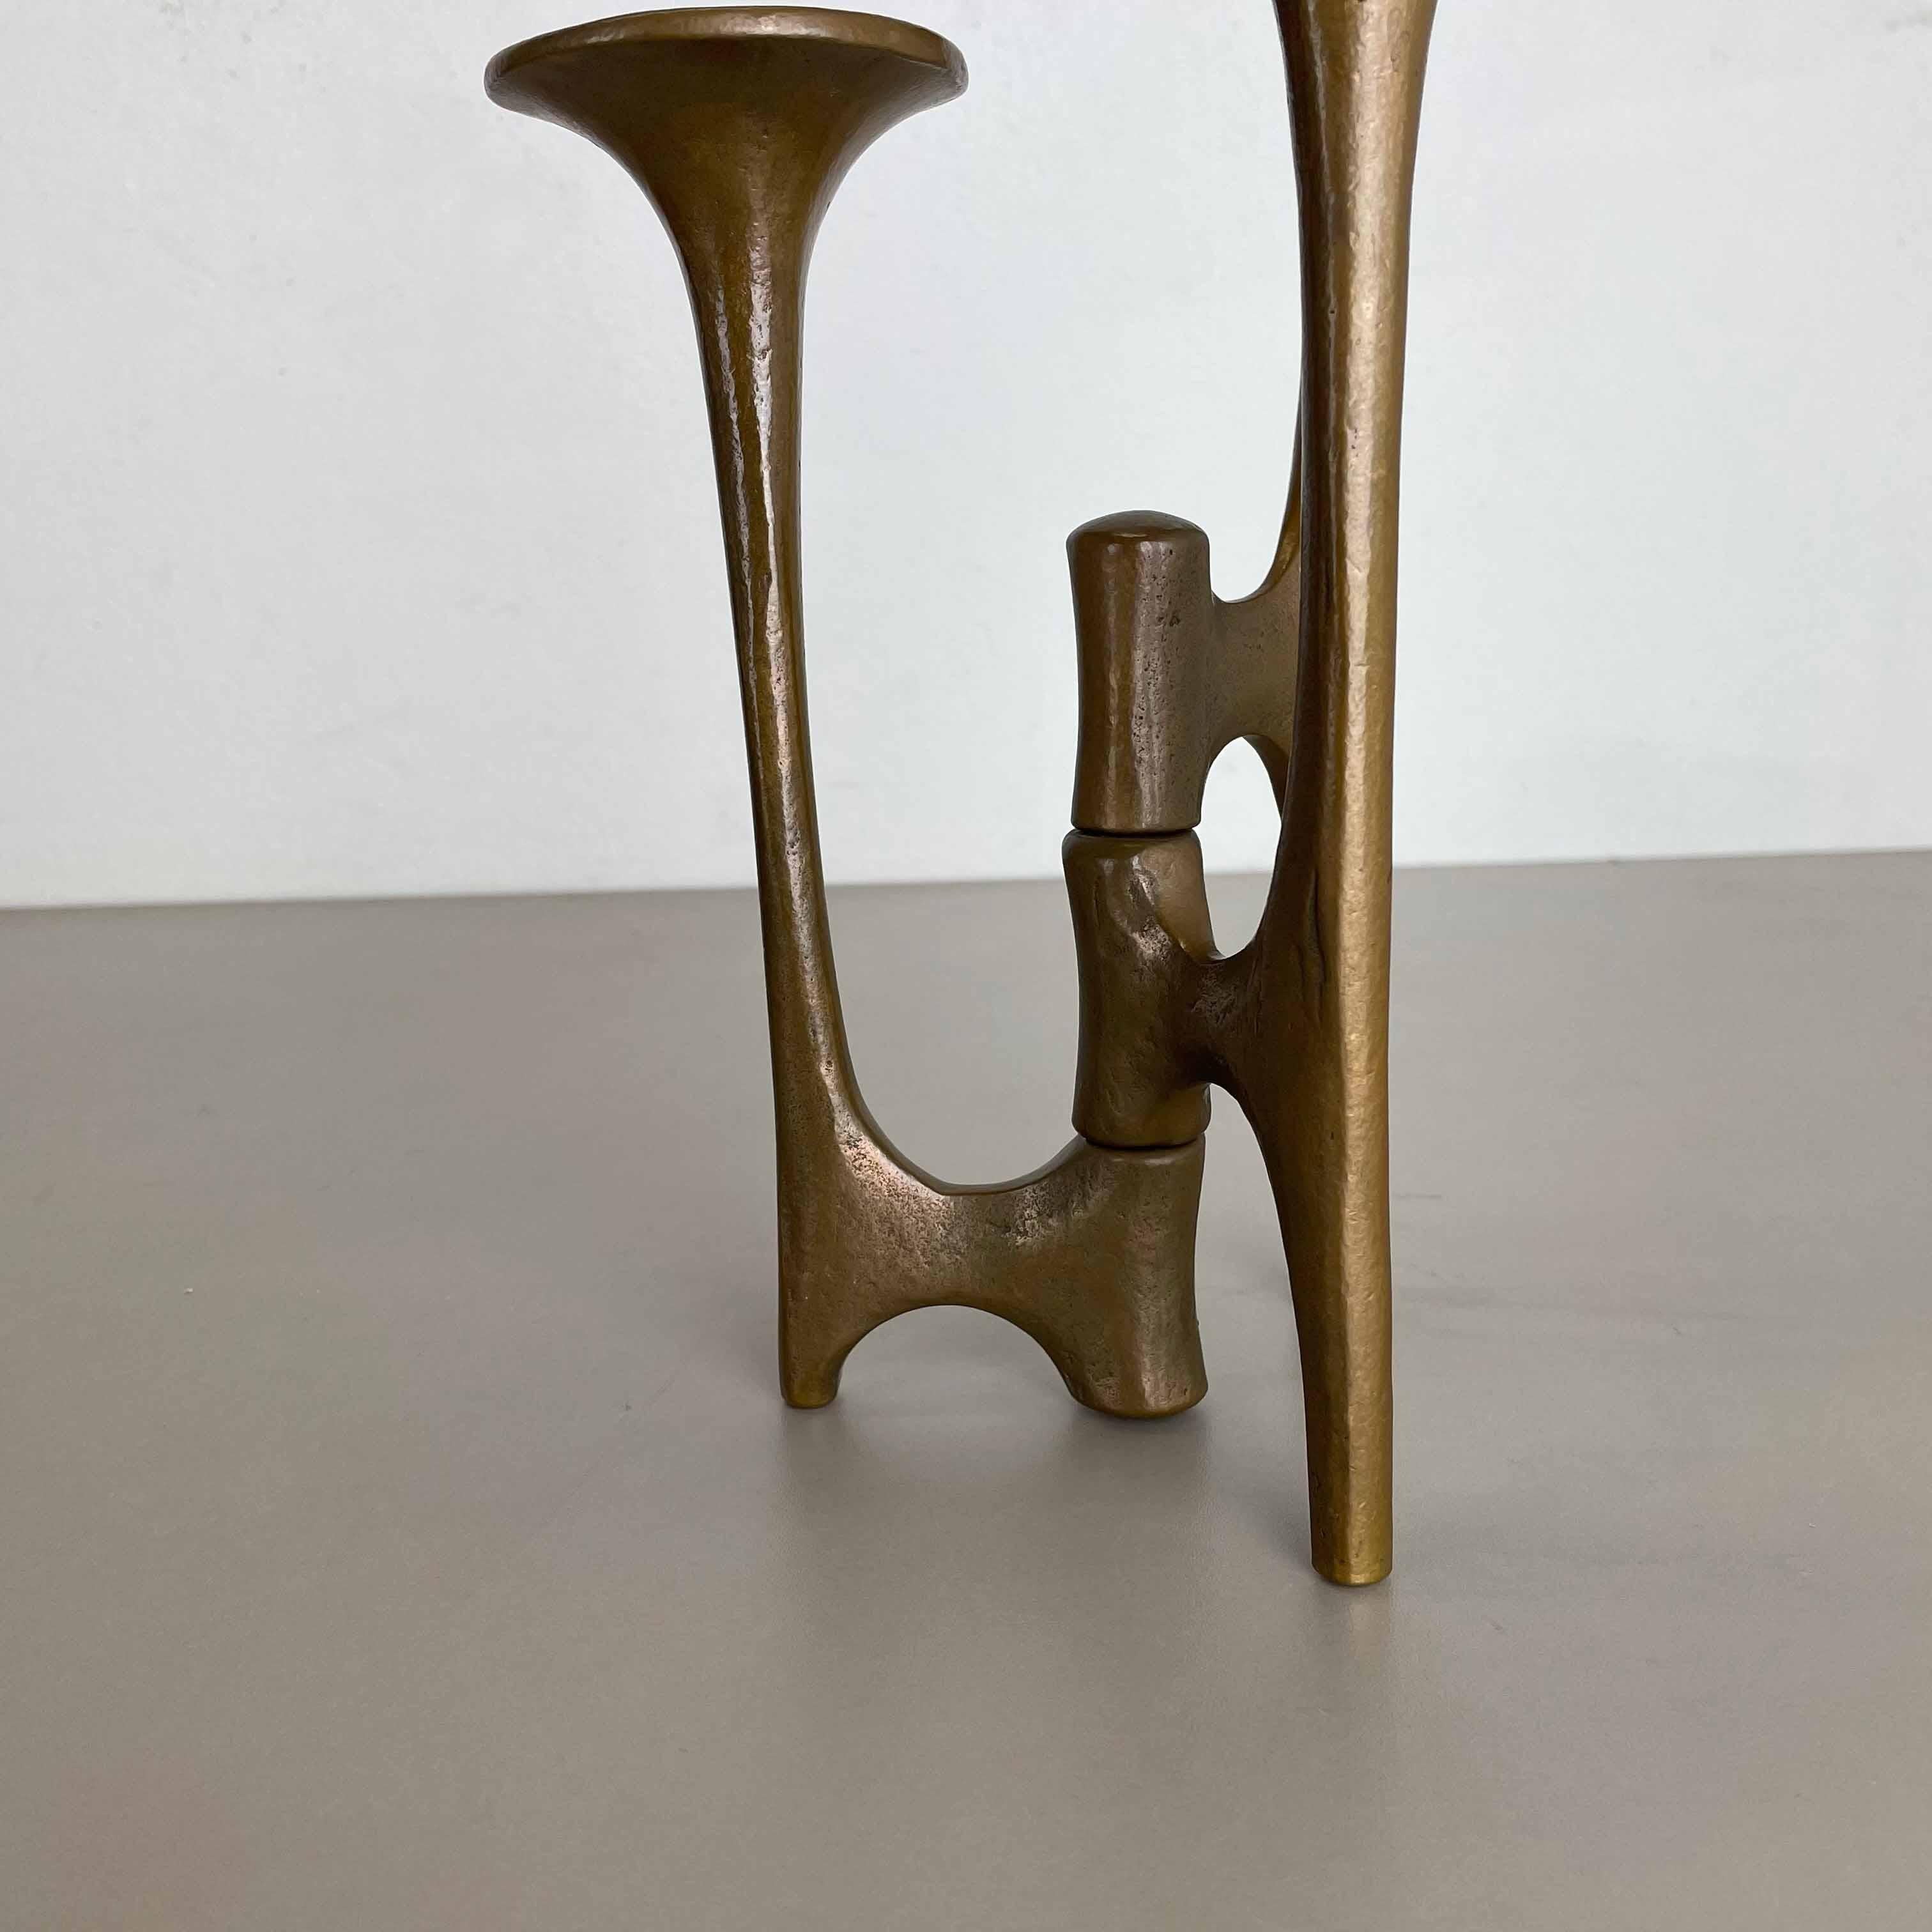 20th Century Midcentury Brutalist Bronze TRIPOD Candleholder by Michael Harjes, Germany 1960s For Sale